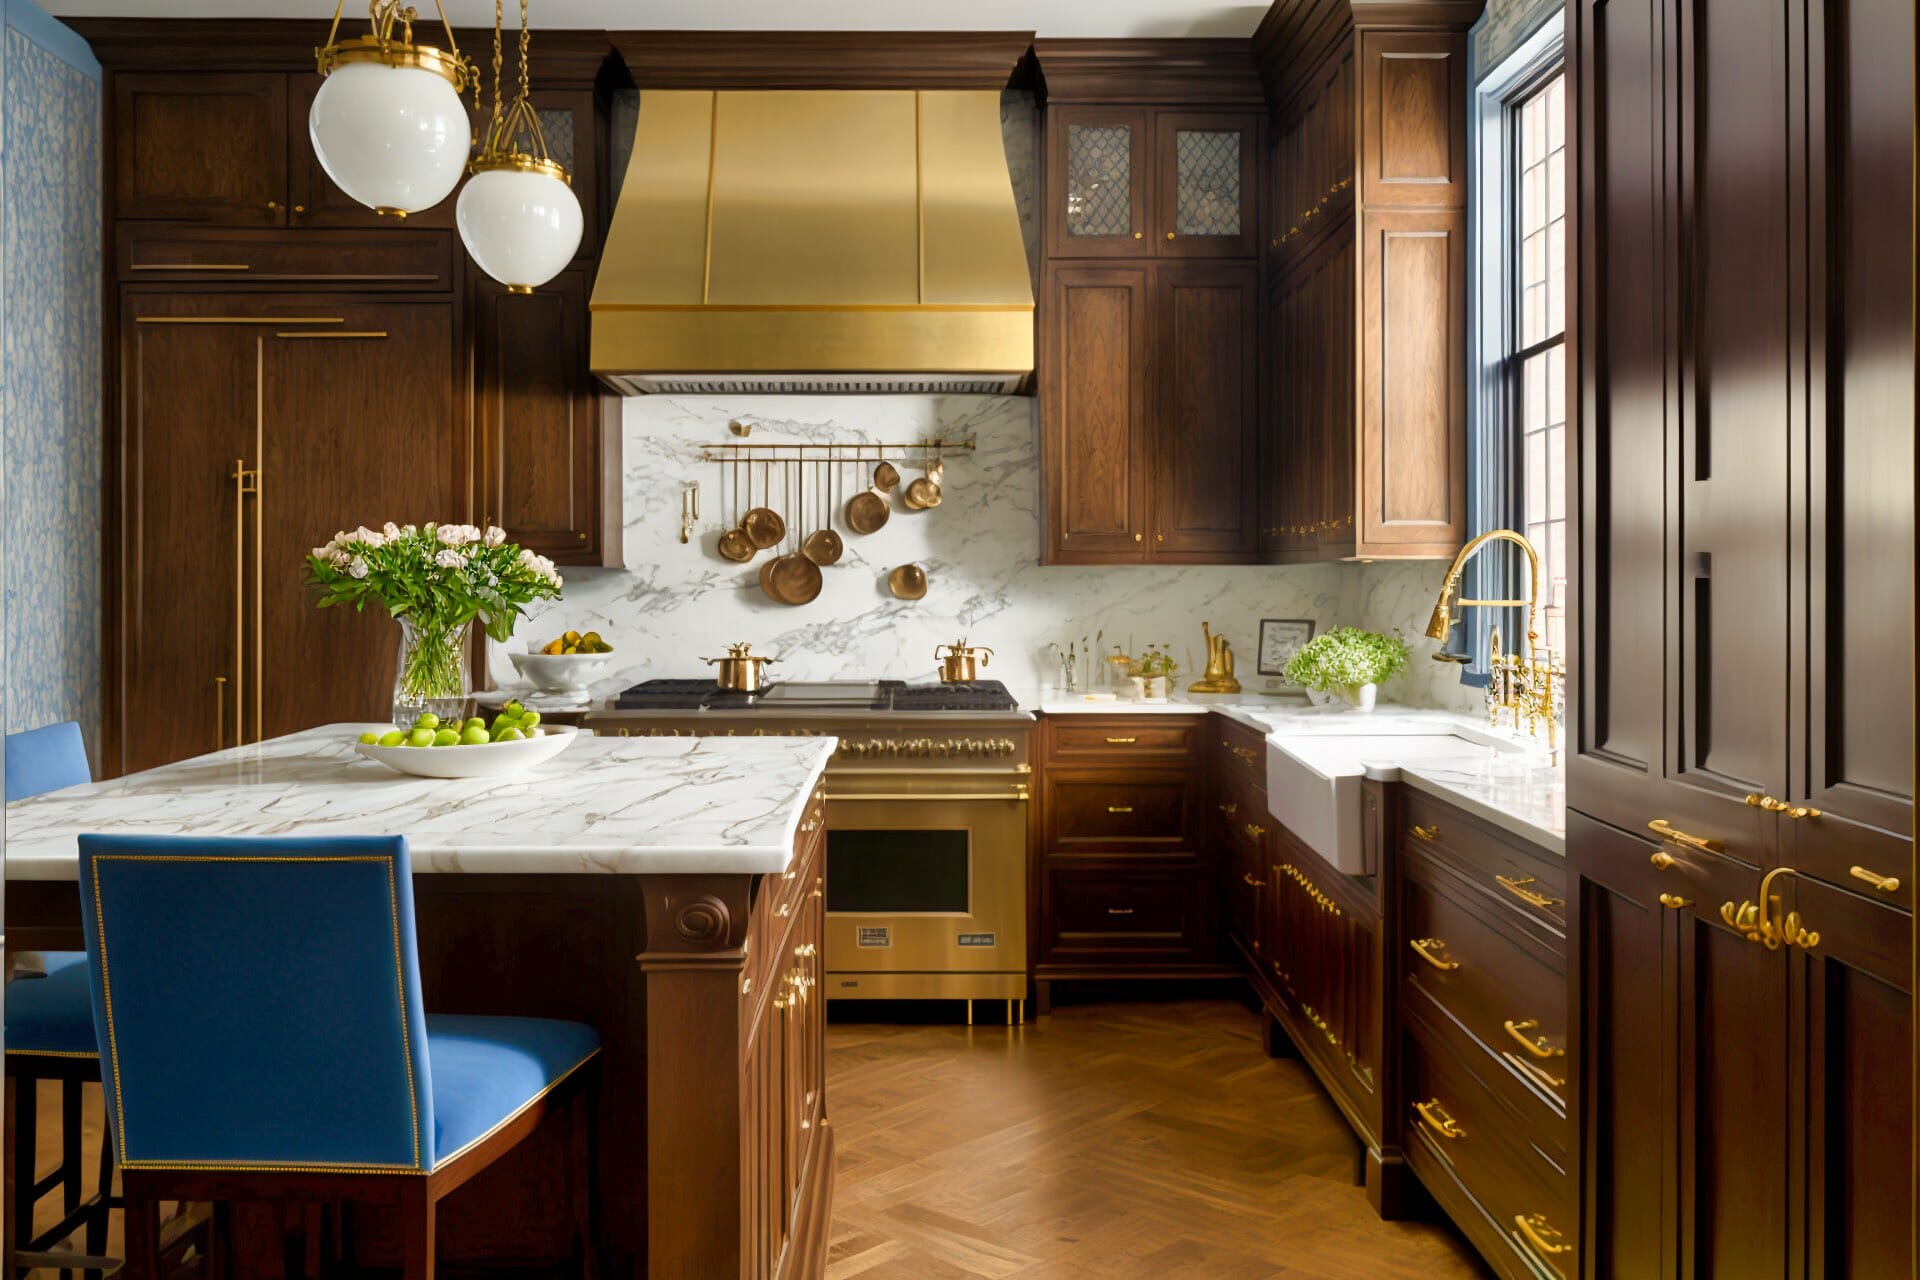 A Luxurious, Traditional Kitchen Featuring Rich Oak Cabinetry, Brass Hardware And Accents, And A Large Marble-Top Island.